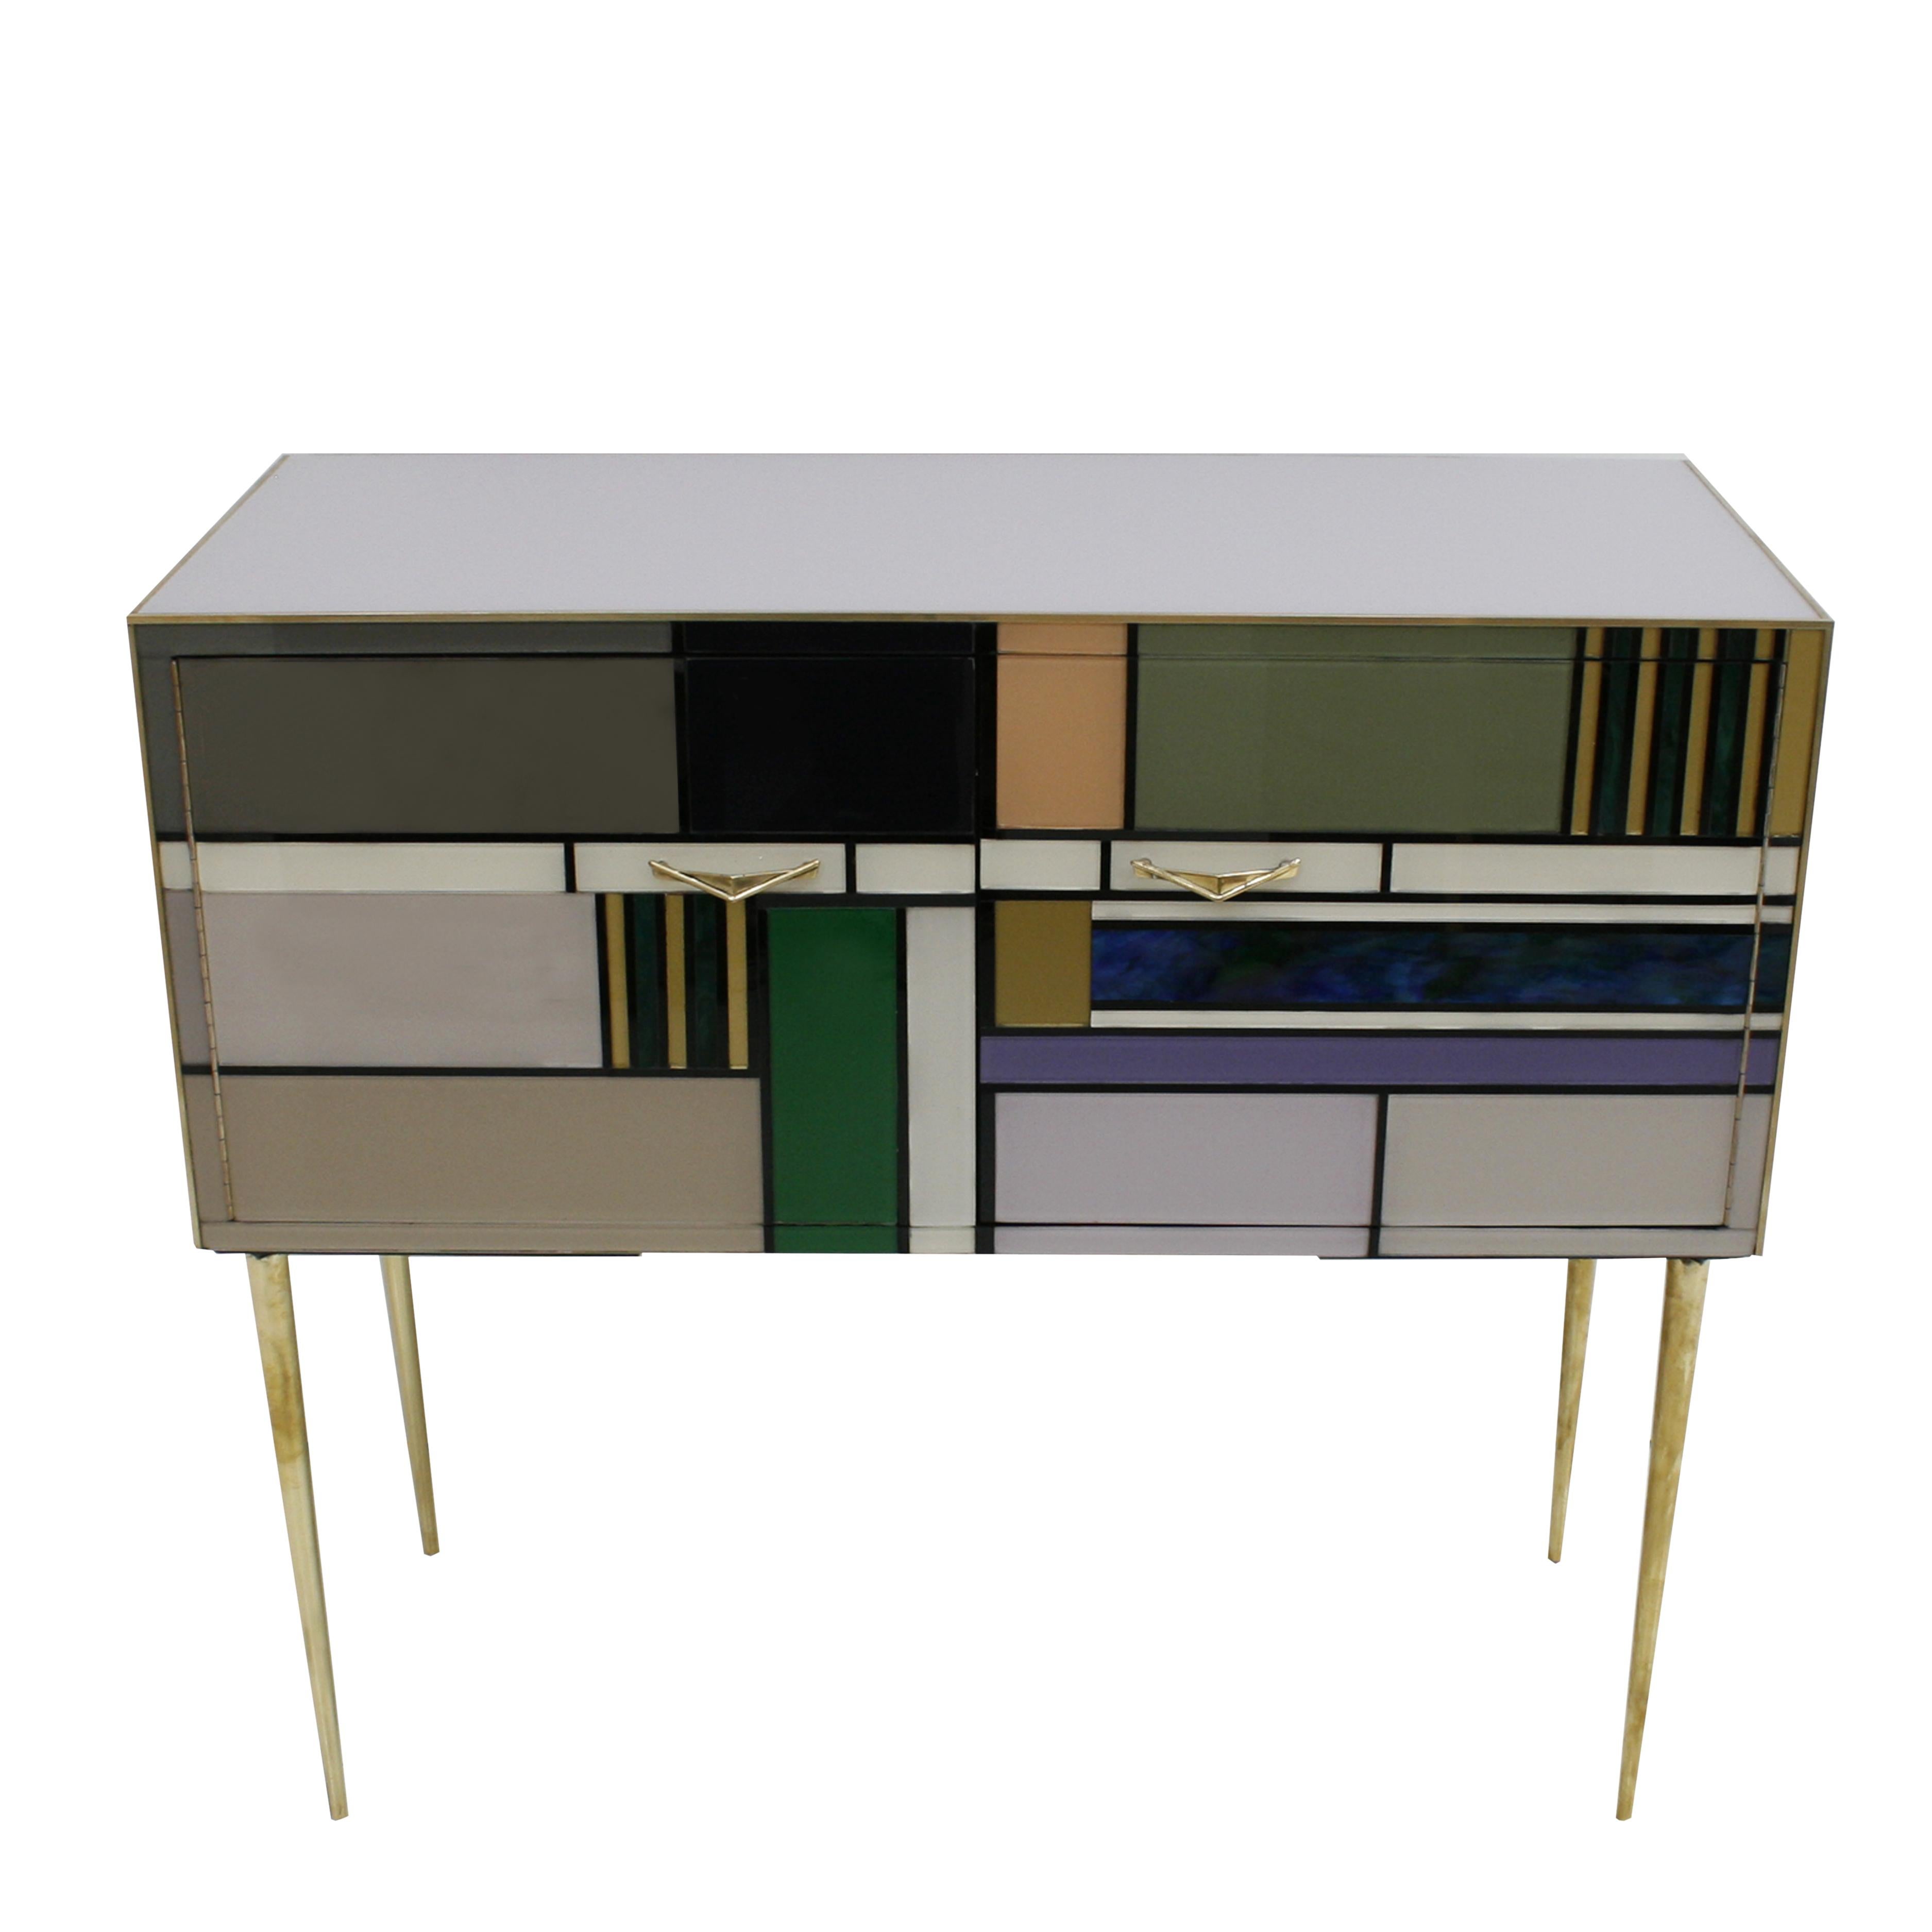 Pair of Italian sideboards composed of two folding doors. Structure made of solid wood covered in colored glass. Profiles, handles and legs are made of solid brass.